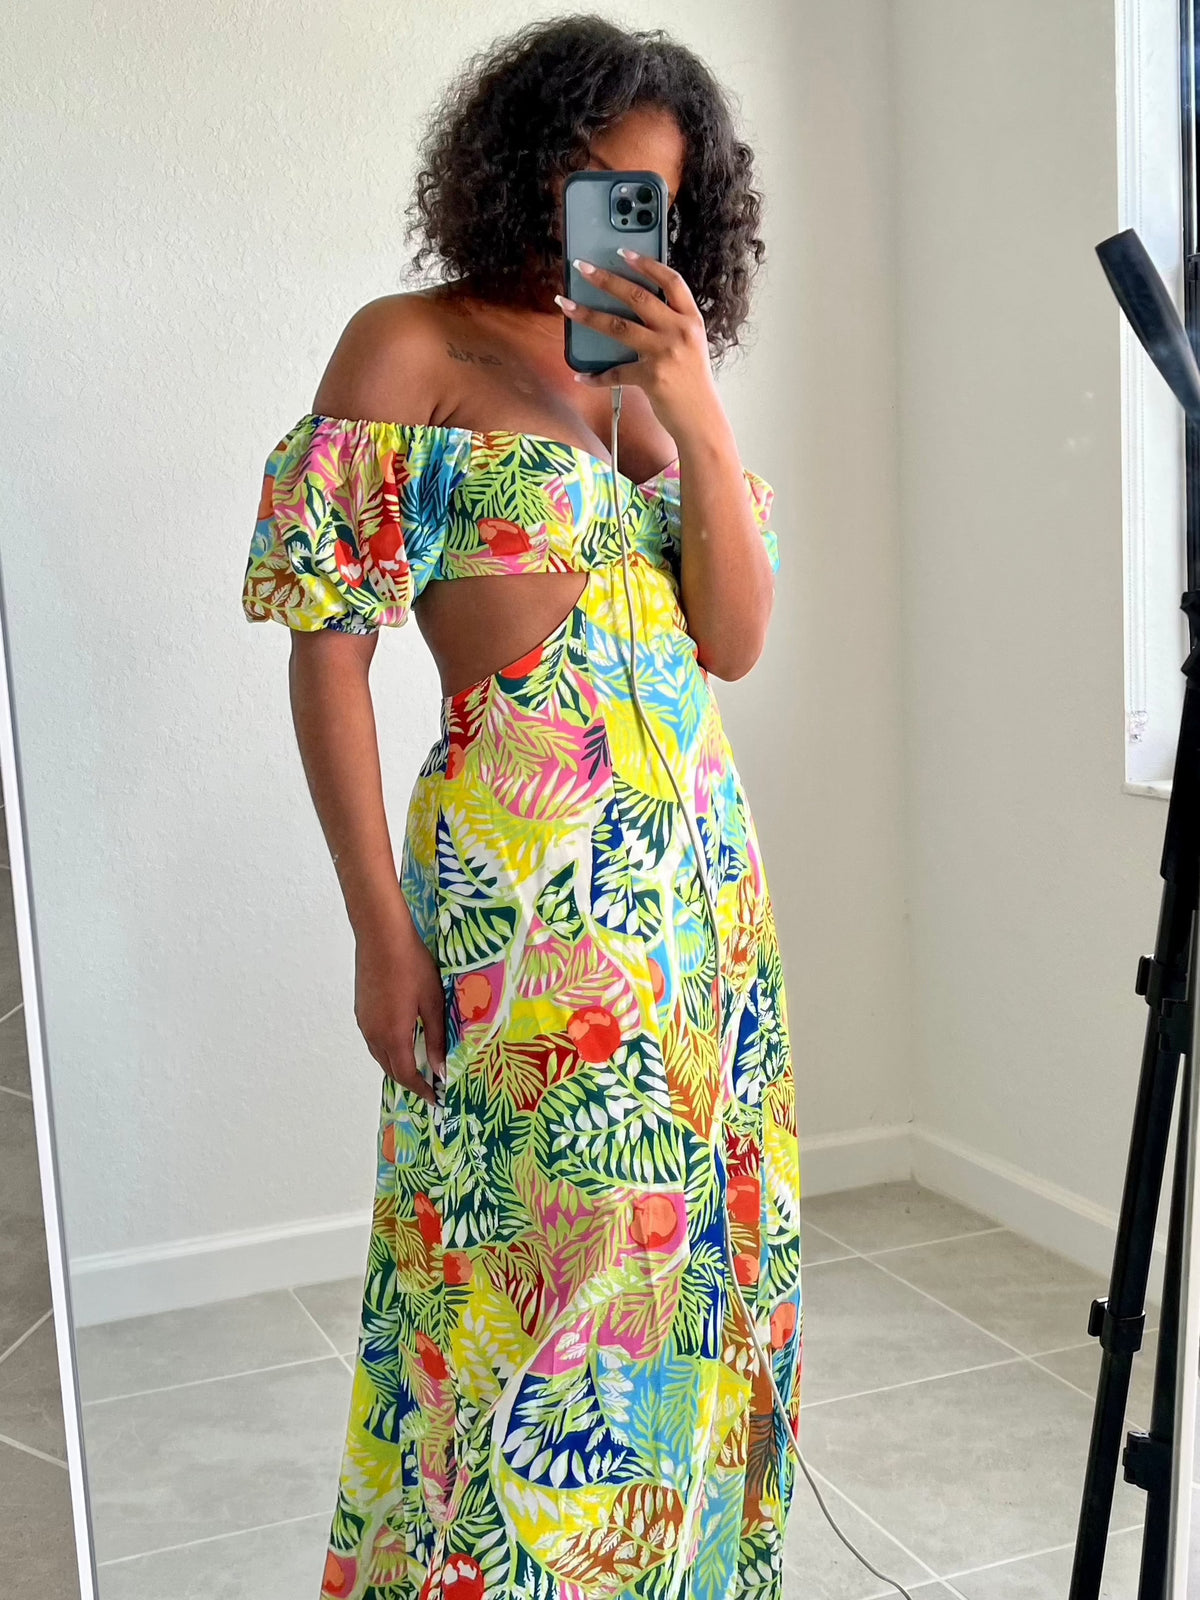 Get trendy with Tropical Floral Cut-out Feminine Flowy Maxi Dress - Dresses available at ELLE TENAJ. Grab yours for $66.48 today!